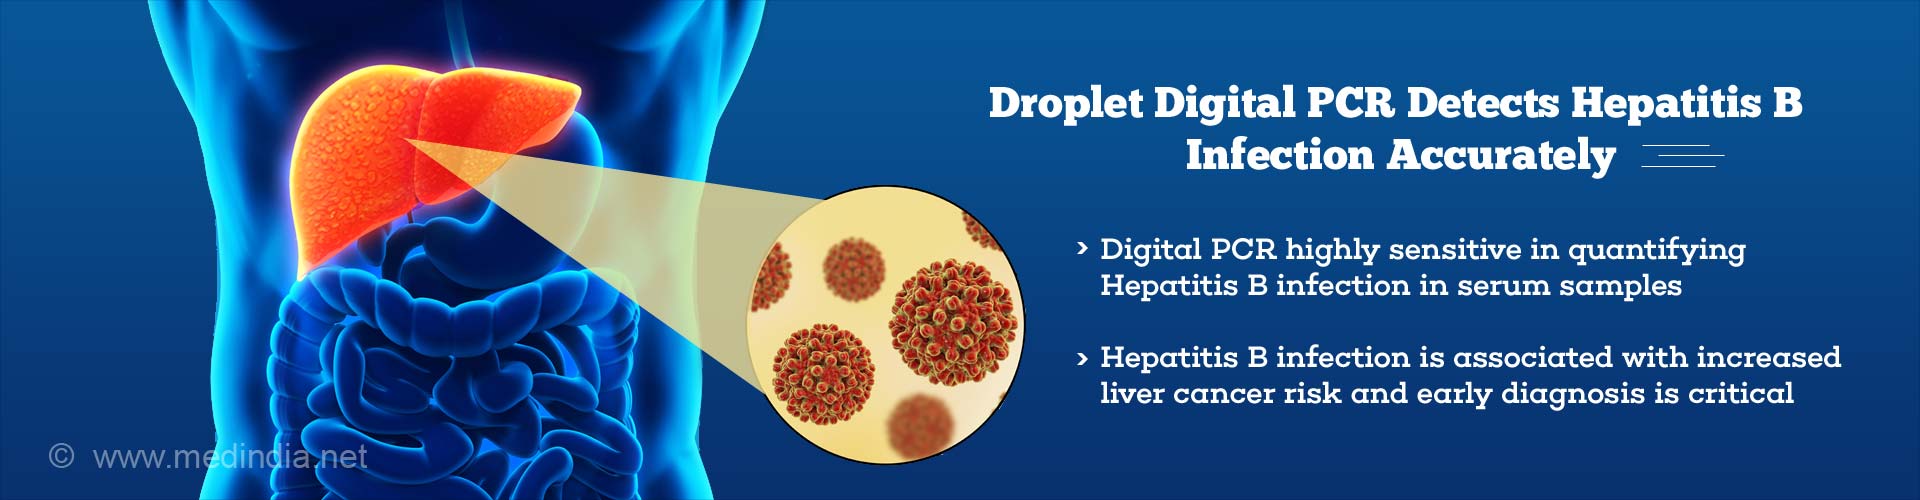 Droplet Digital PCR Detects Hepatitis B Infection Accurately
- Digital PCR highly sensitive in quantifying Hepatitis B infection in serum samples
- Hepatitis B infection is associated with increased liver cancer risk and early diagnosis is critical